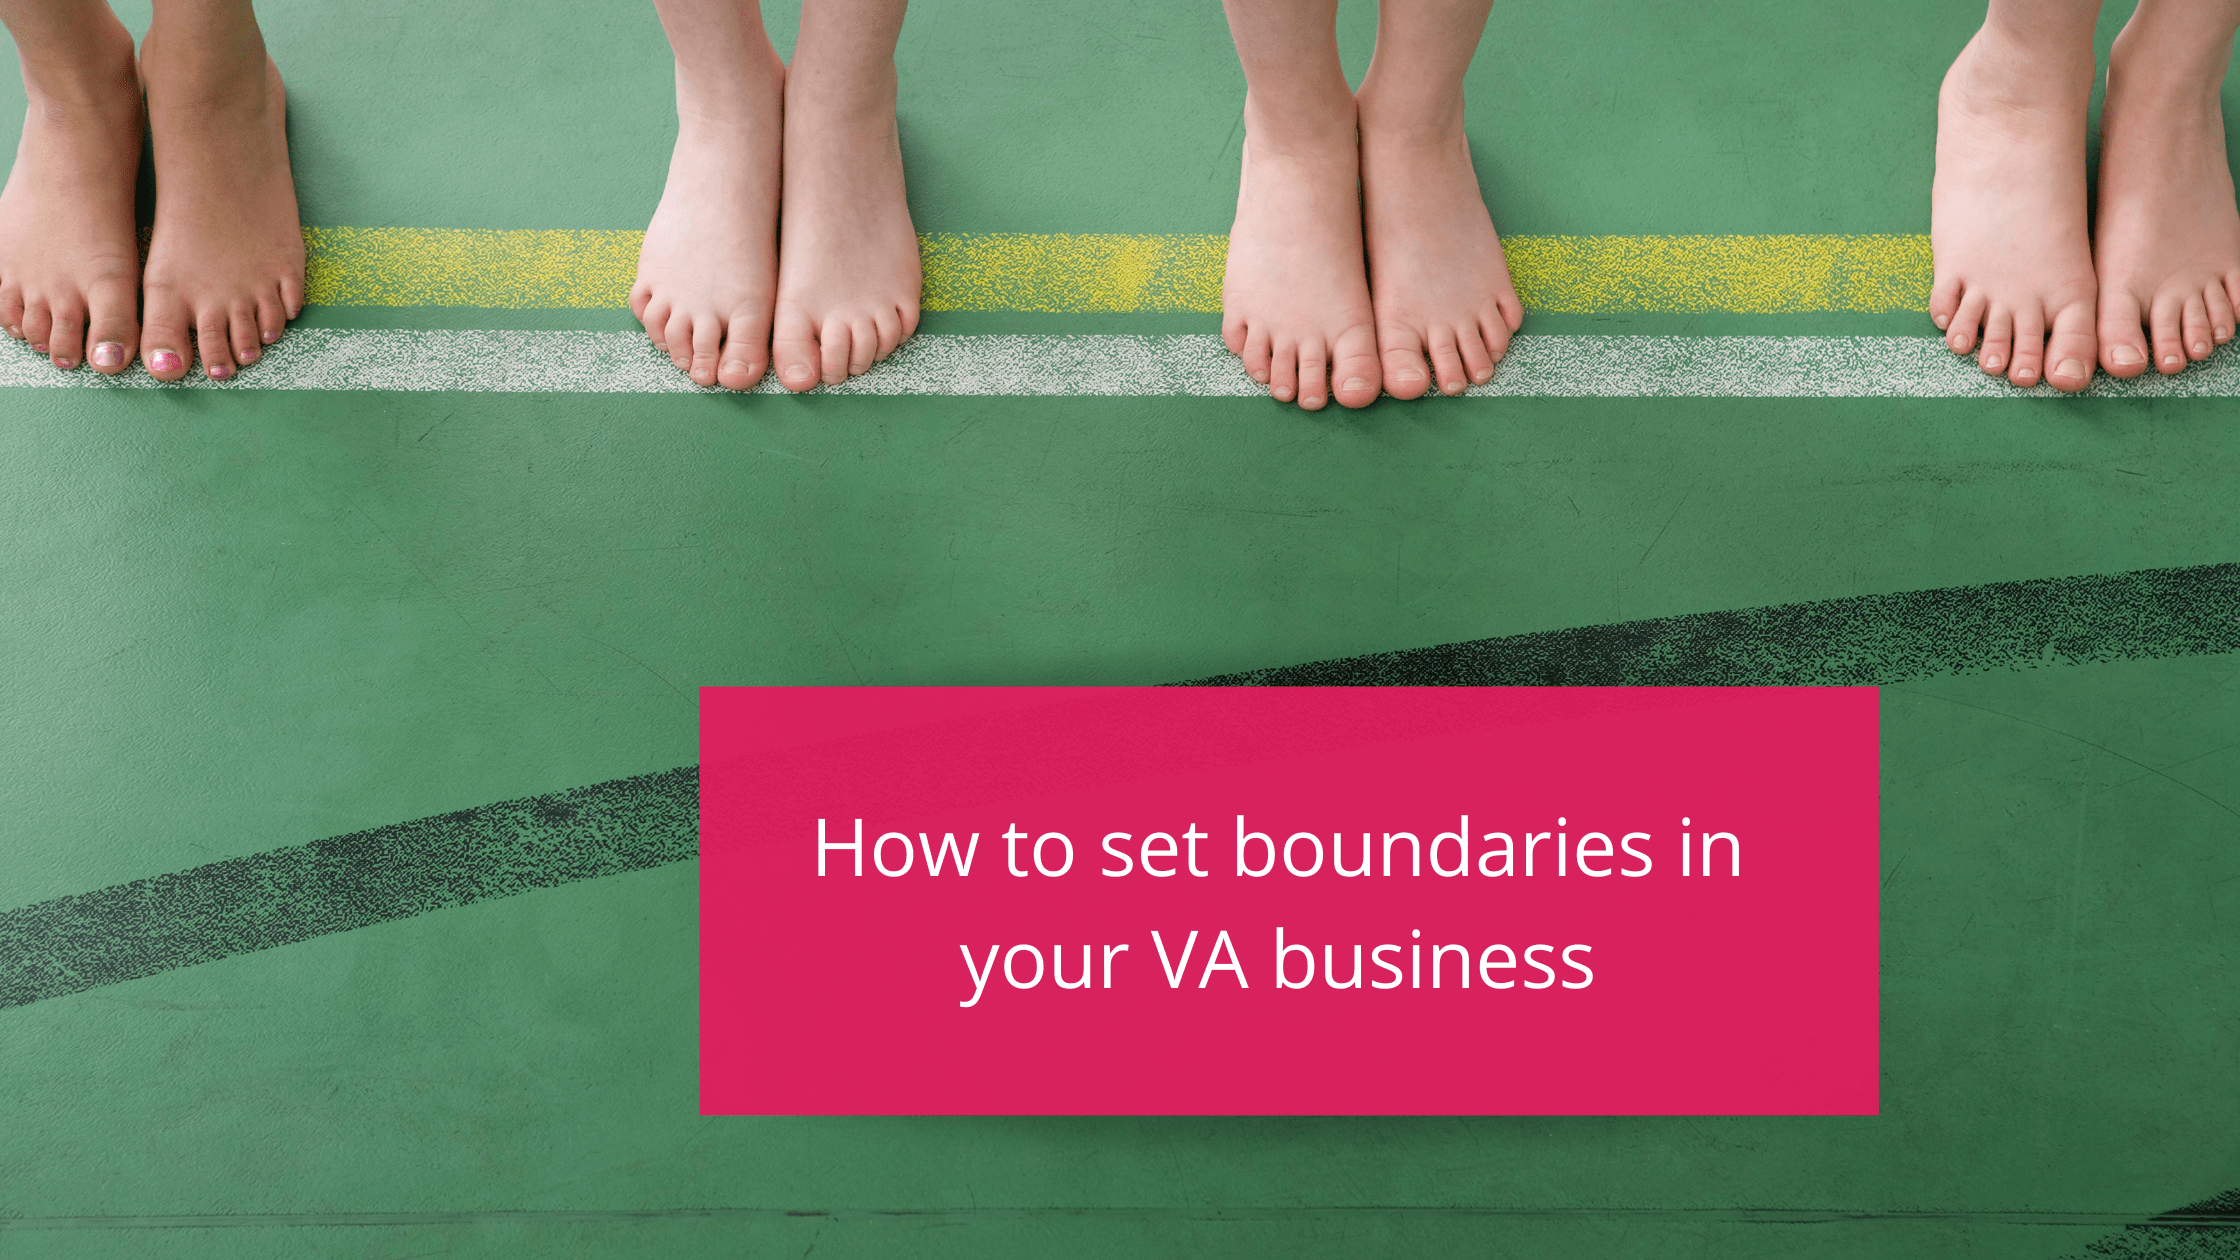 How to set boundaries in your VA business